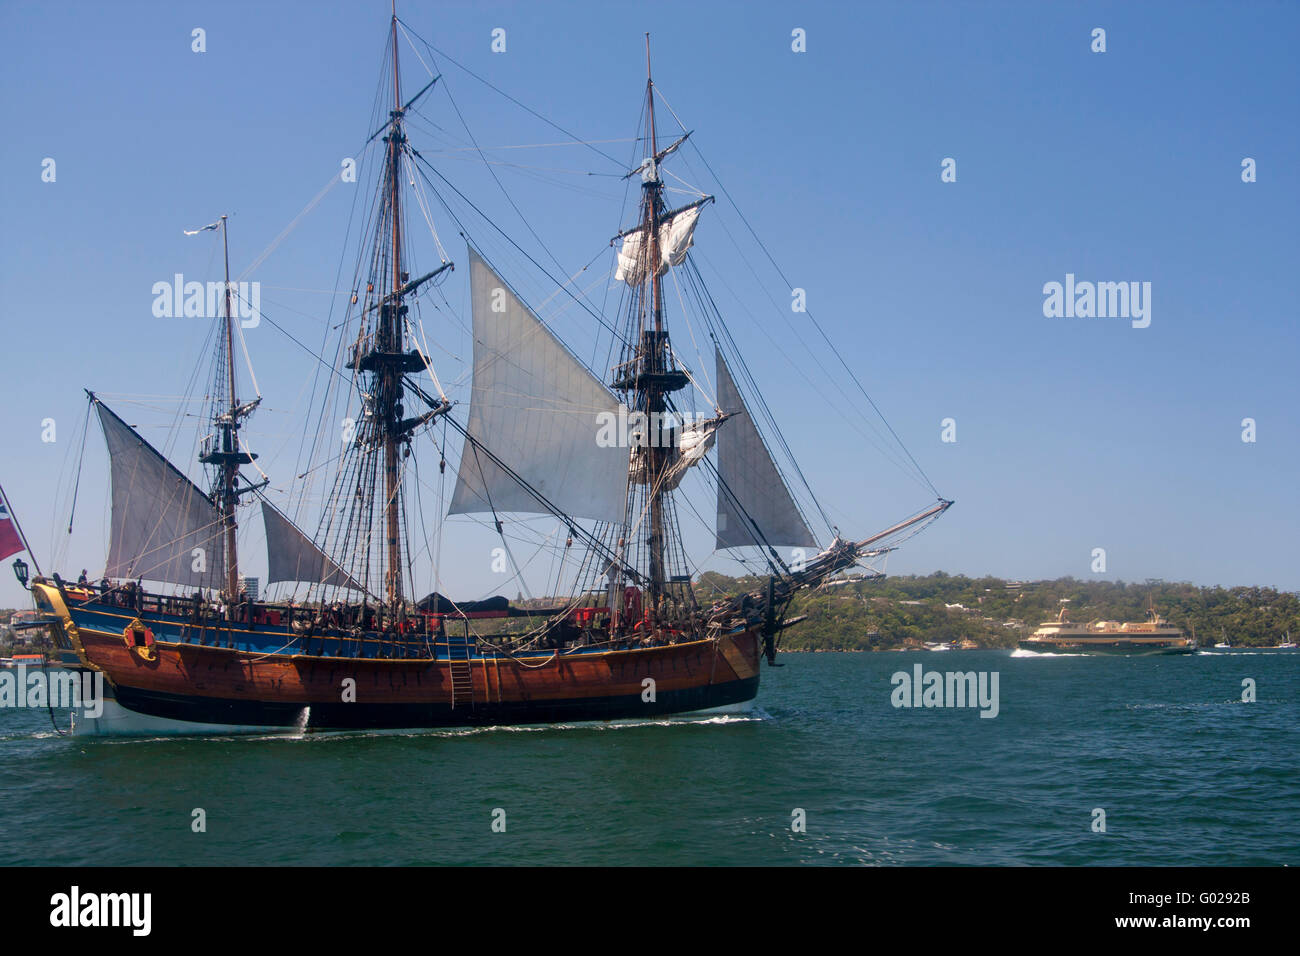 Historic tall ship cruising in Sydney Harbour with Manly ferry in background Sydney NSW Australia Stock Photo